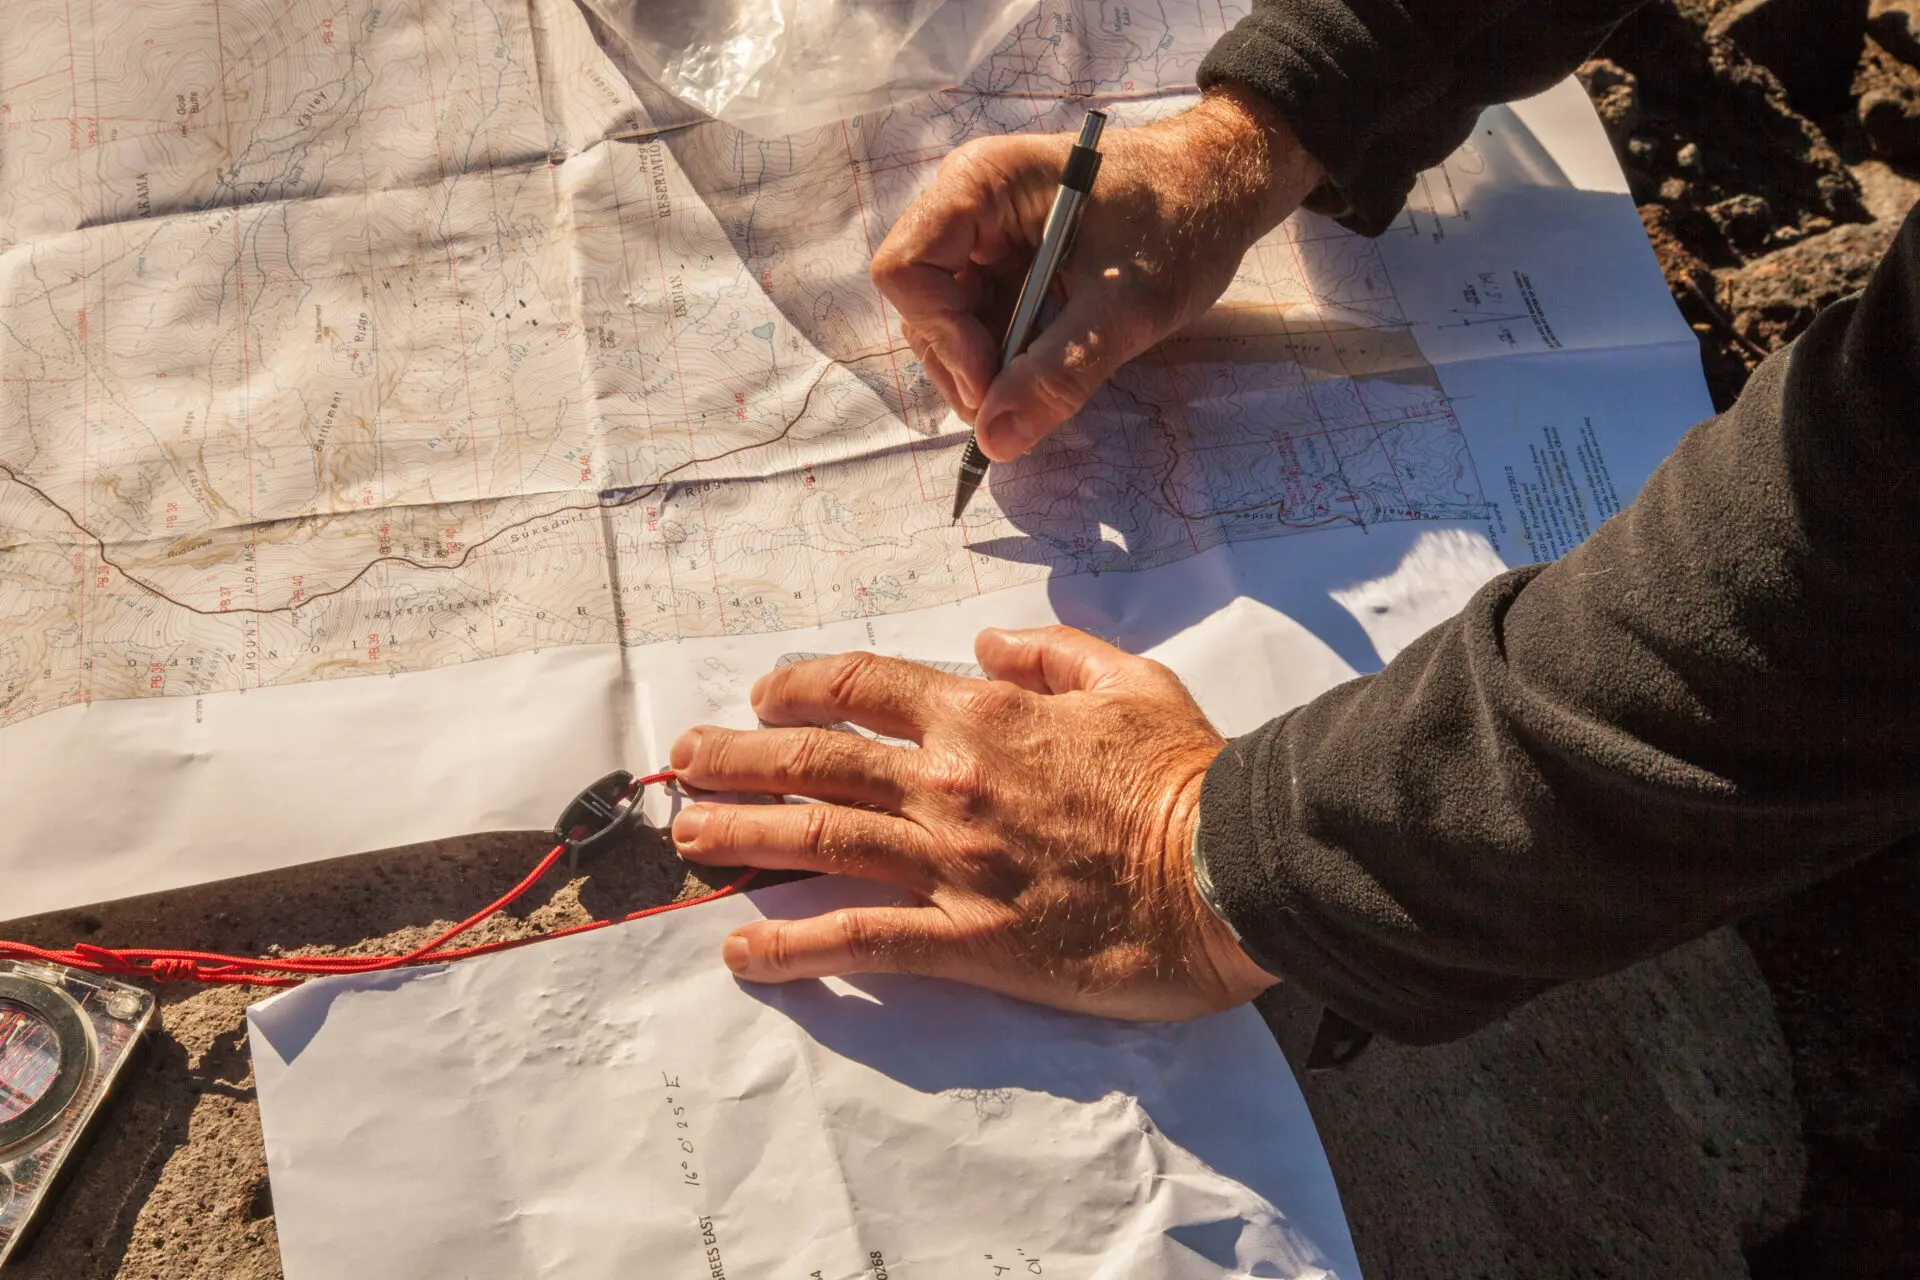 A hiker consults a topo map.